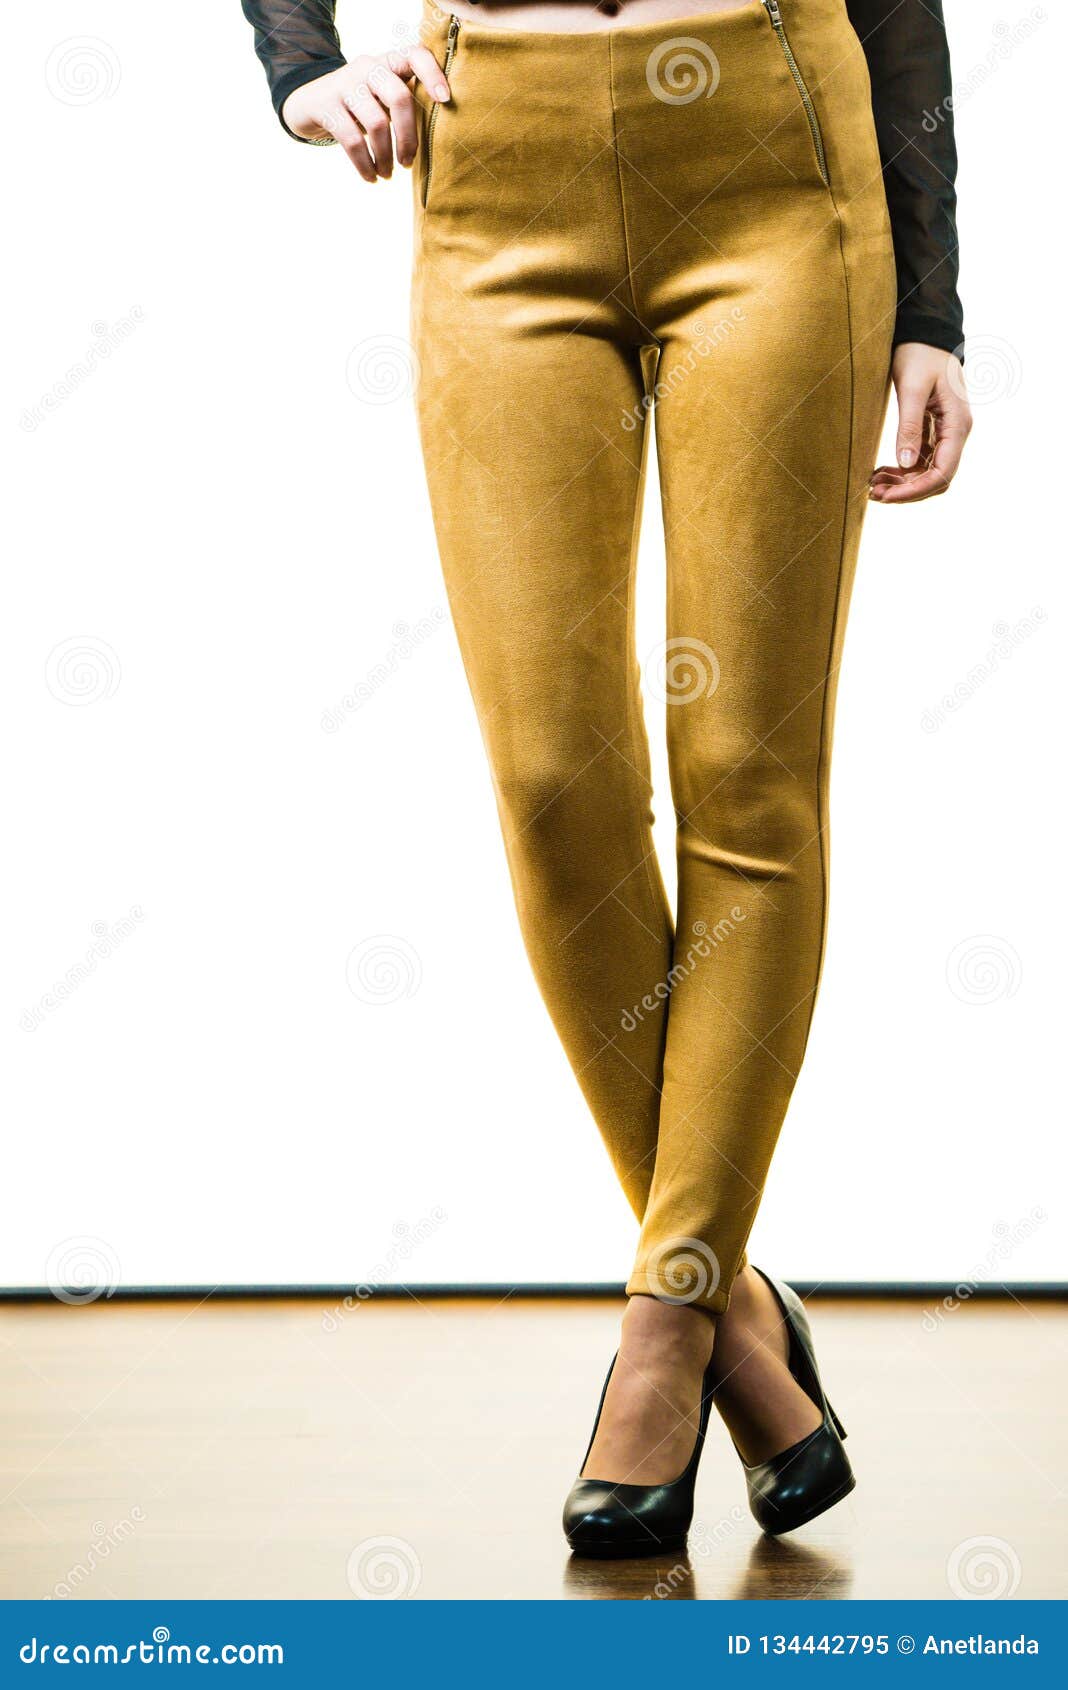 Tight pants wearing women What Your